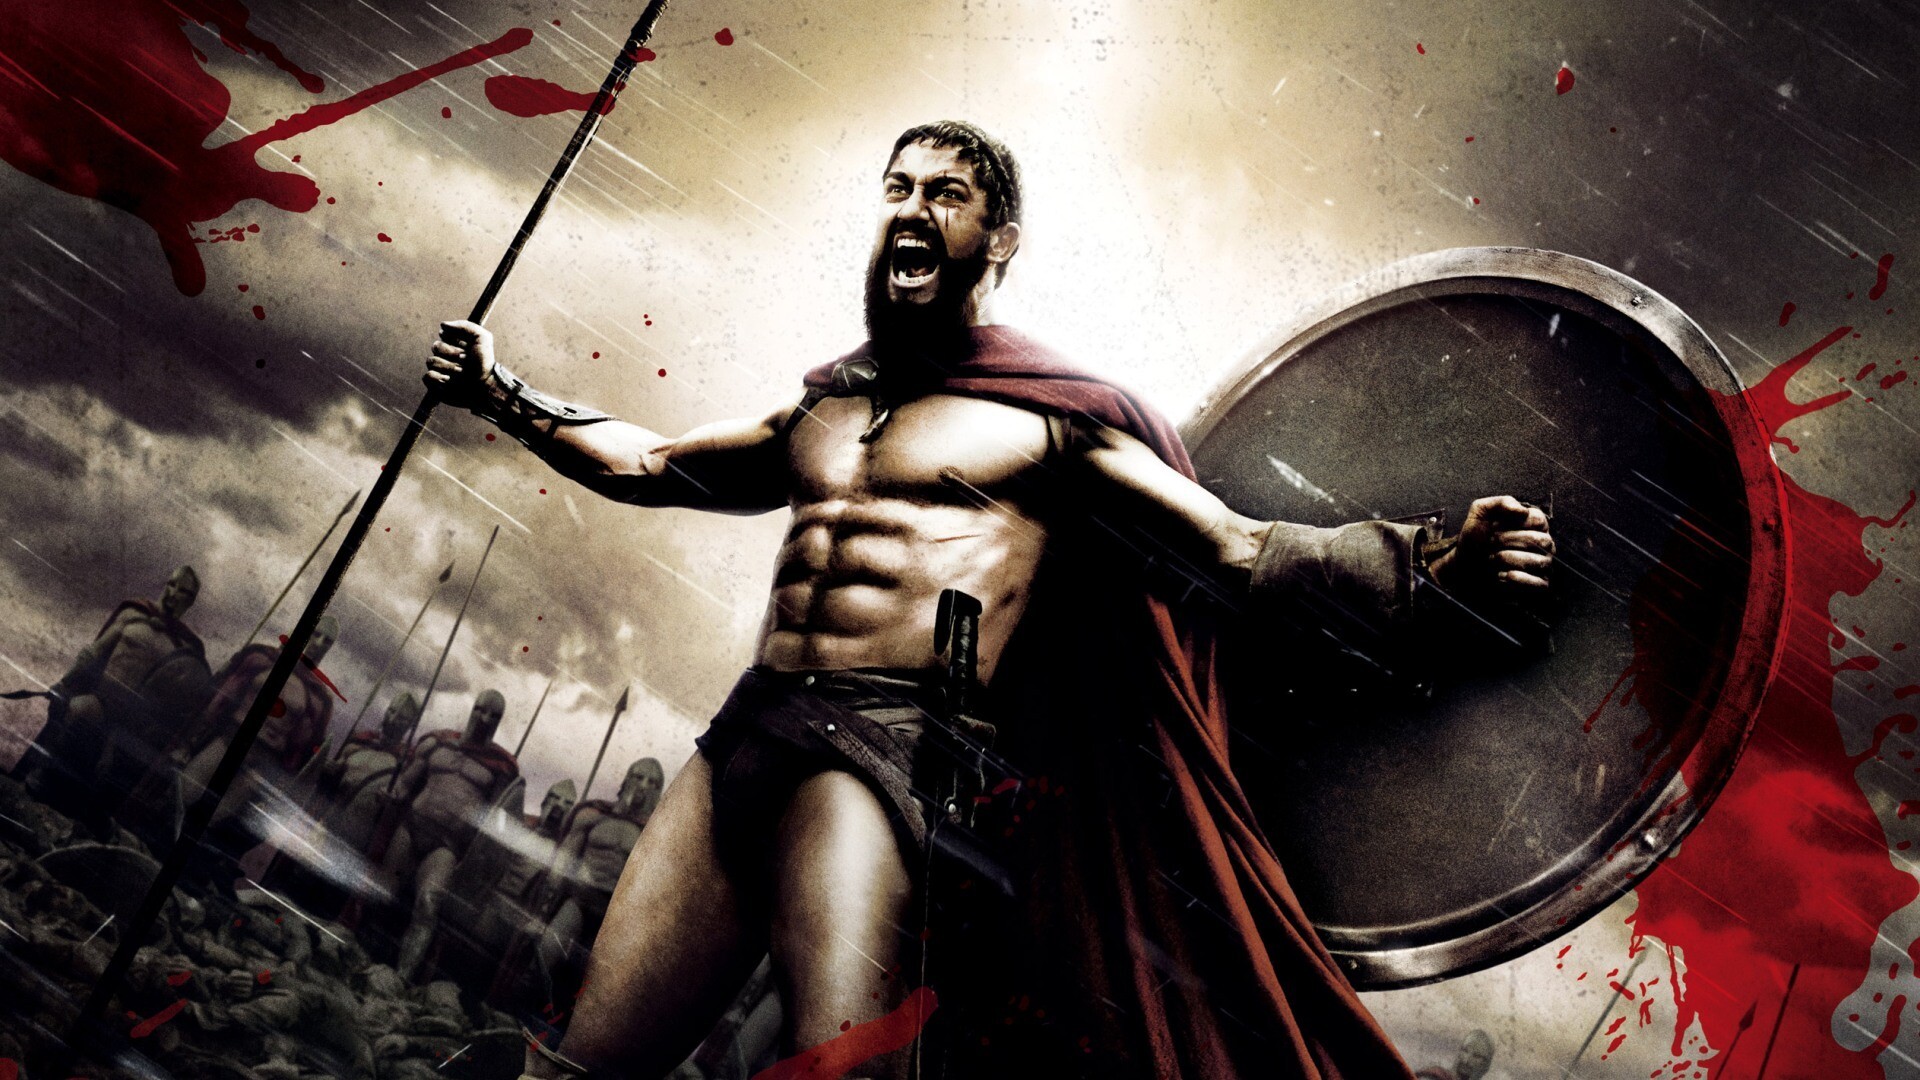 Sparta: A comics-style moment in 300, Battle-of-Thermopylae-based action film, Gerard Butler, Leonidas I. 1920x1080 Full HD Background.